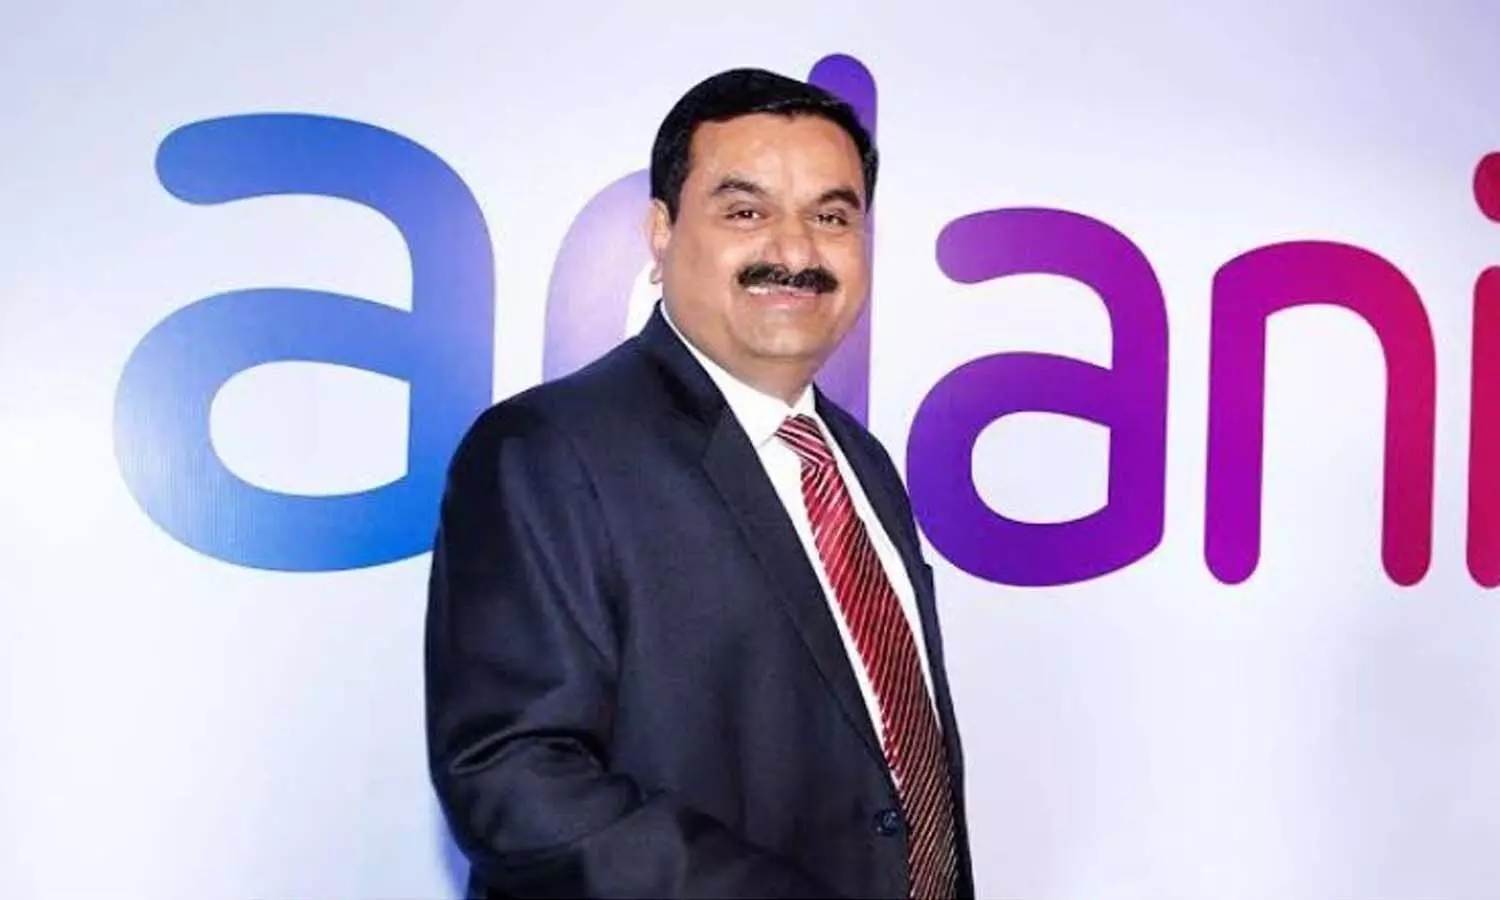 Adani Enterprises and Israel Innovation Authority sign MoU to develop cutting-edge tech solutions